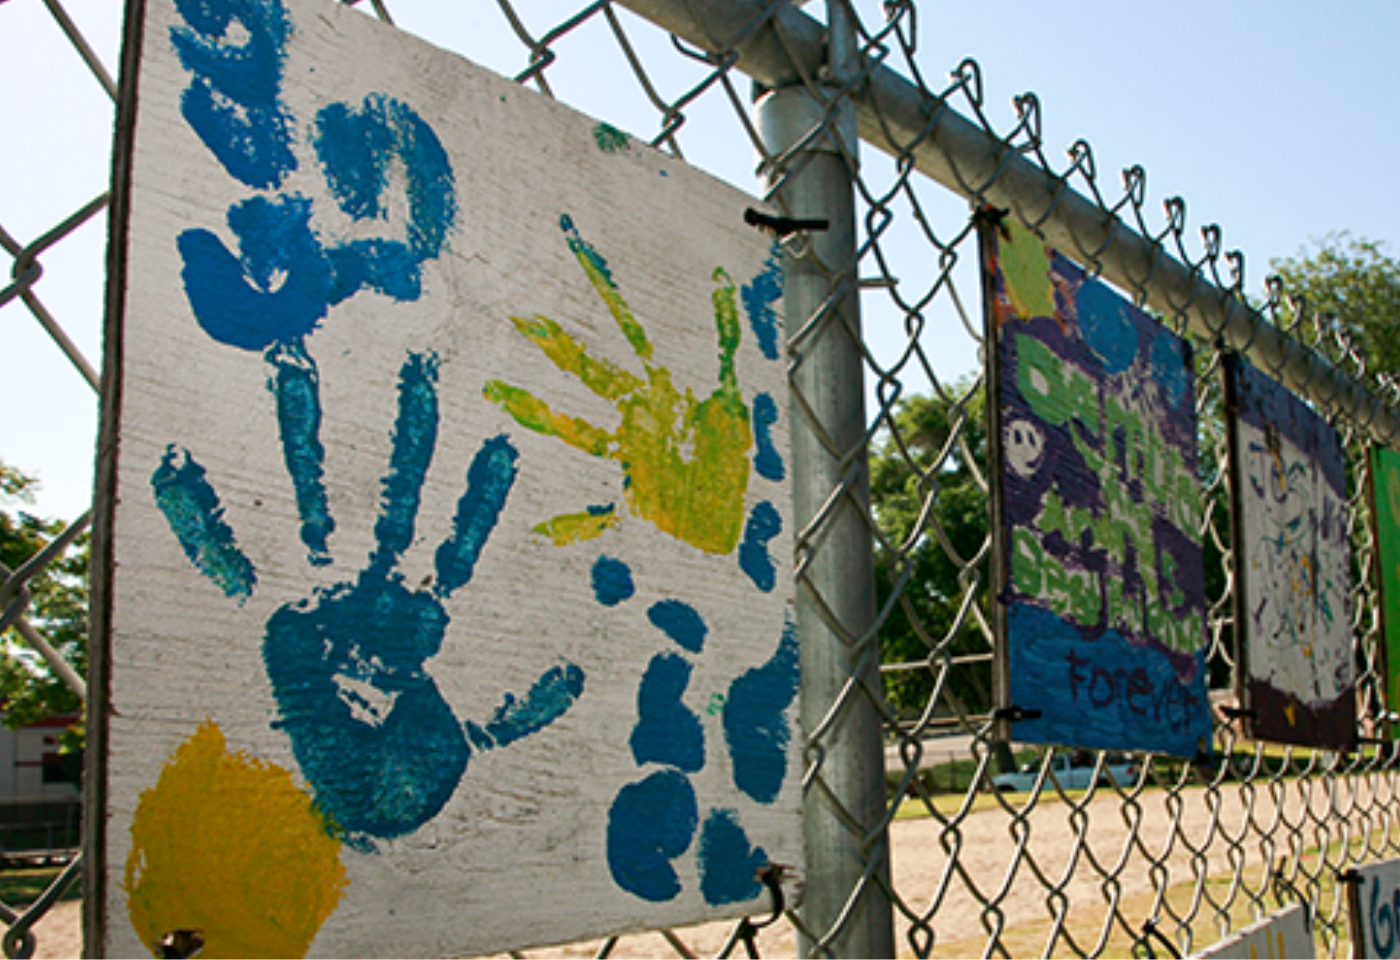 Mural and kids' paintings hanging on a fence at a playground